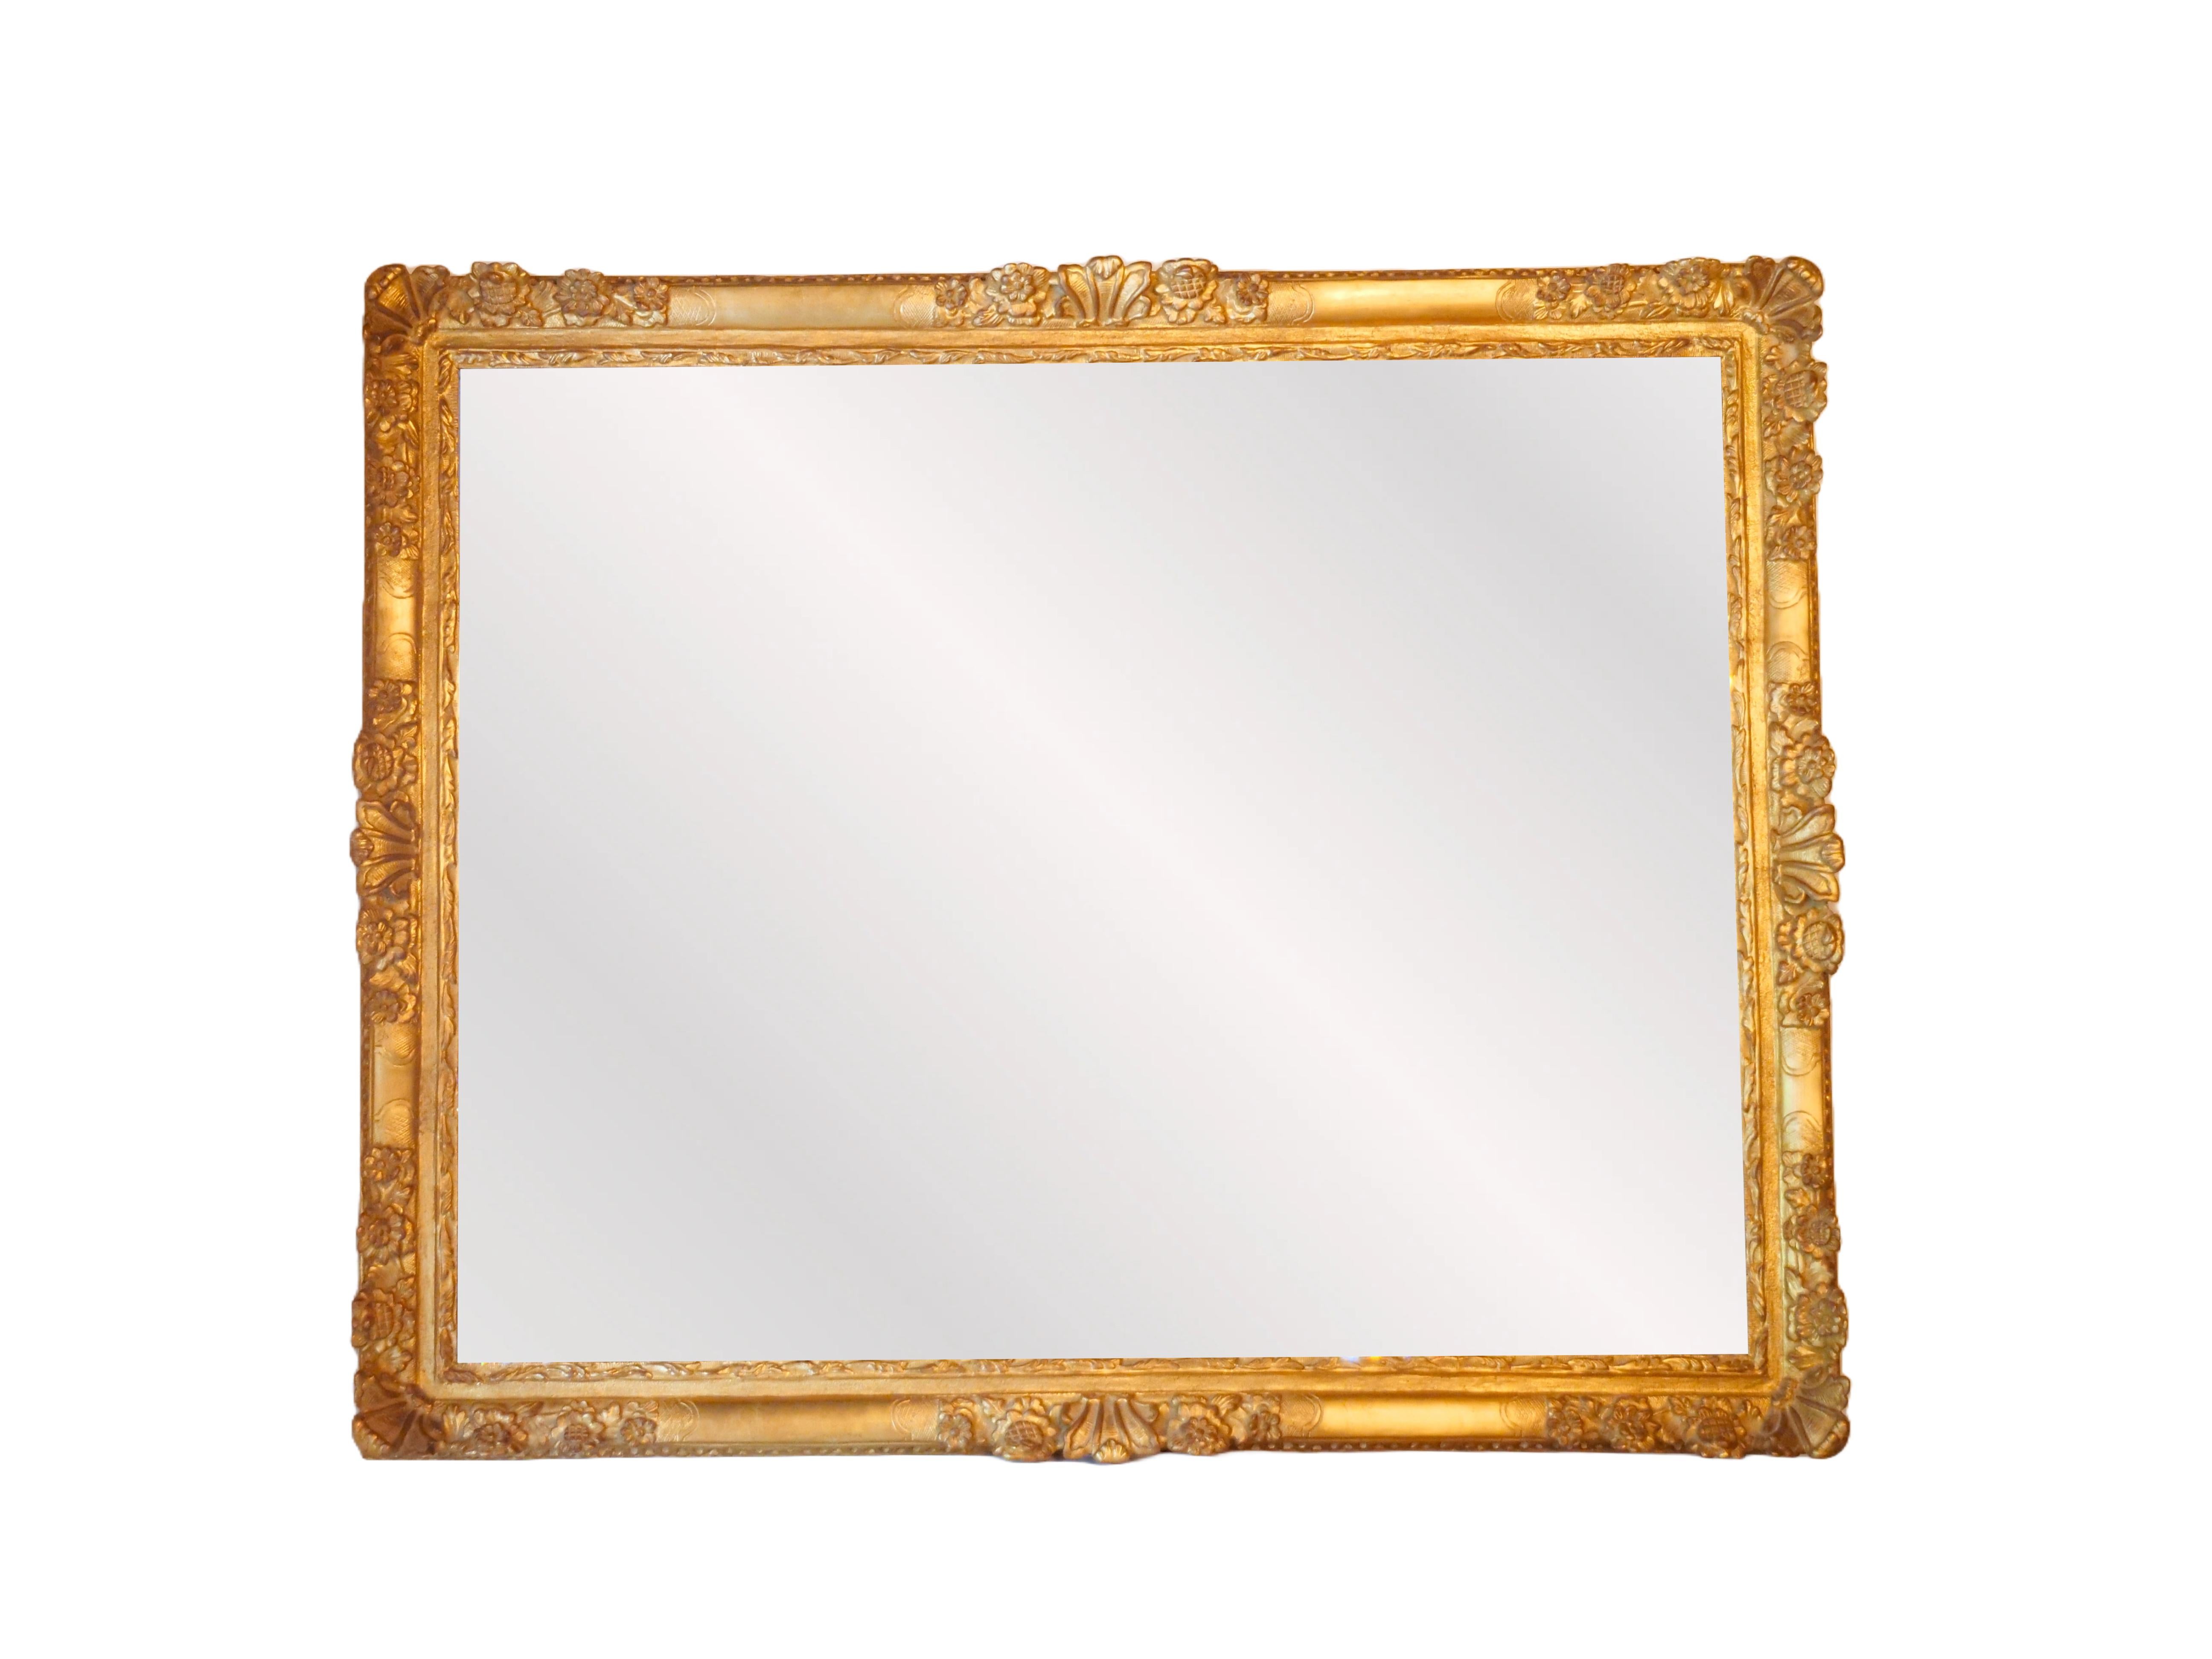 Mid-19th Century Exceptional French Giltwood Frame Rectangular Shape Hanging Wall Mirror For Sale